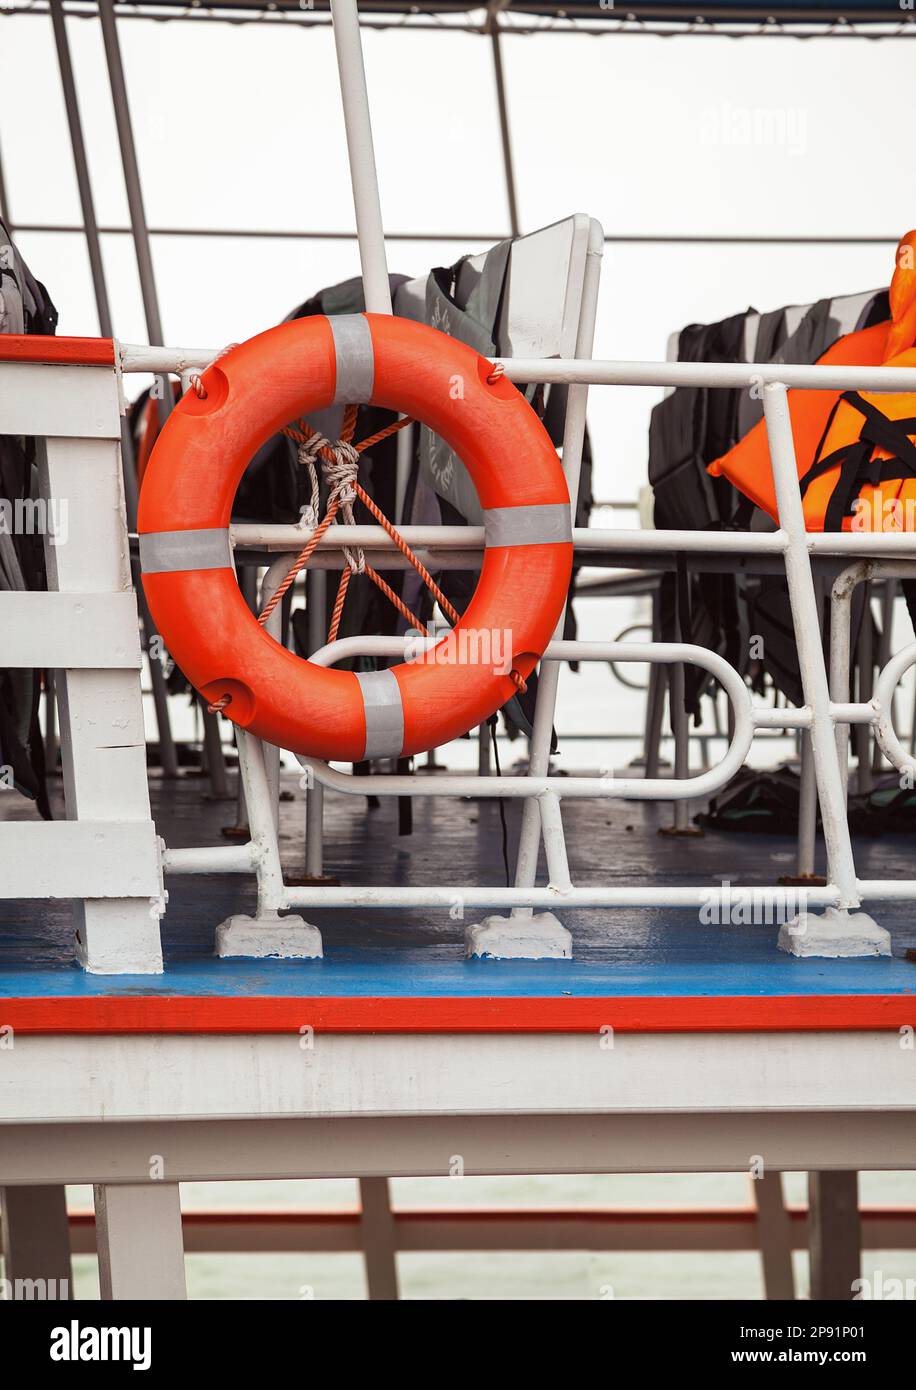 Lifebuoy and life jackets on a ferry deck close-up. Rescue equipment on a ship: buoy and vests for emergencies Stock Photo